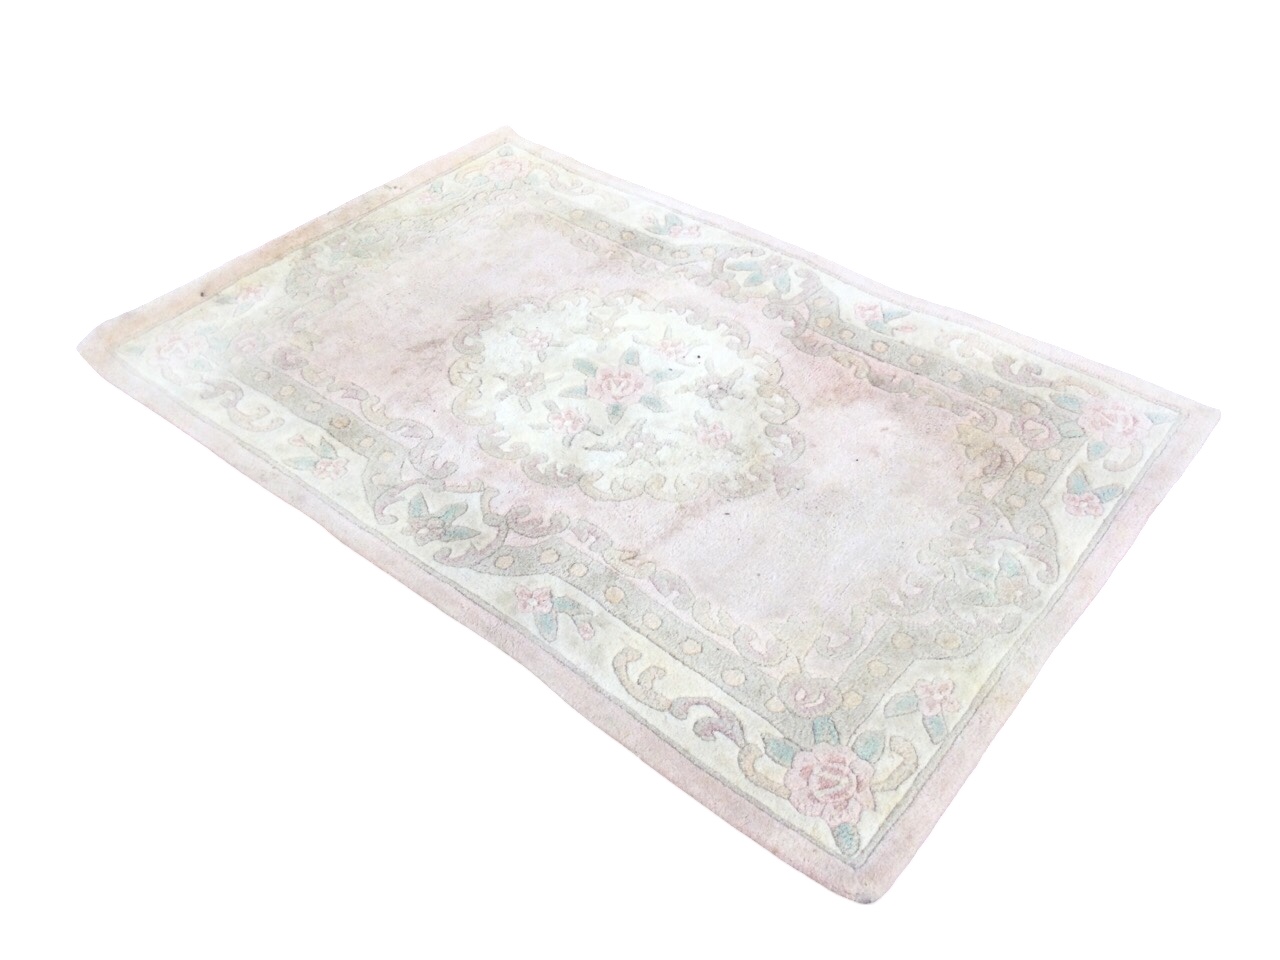 A Chinese wool rug woven in pastel floral shades with central circular medallion on pink field